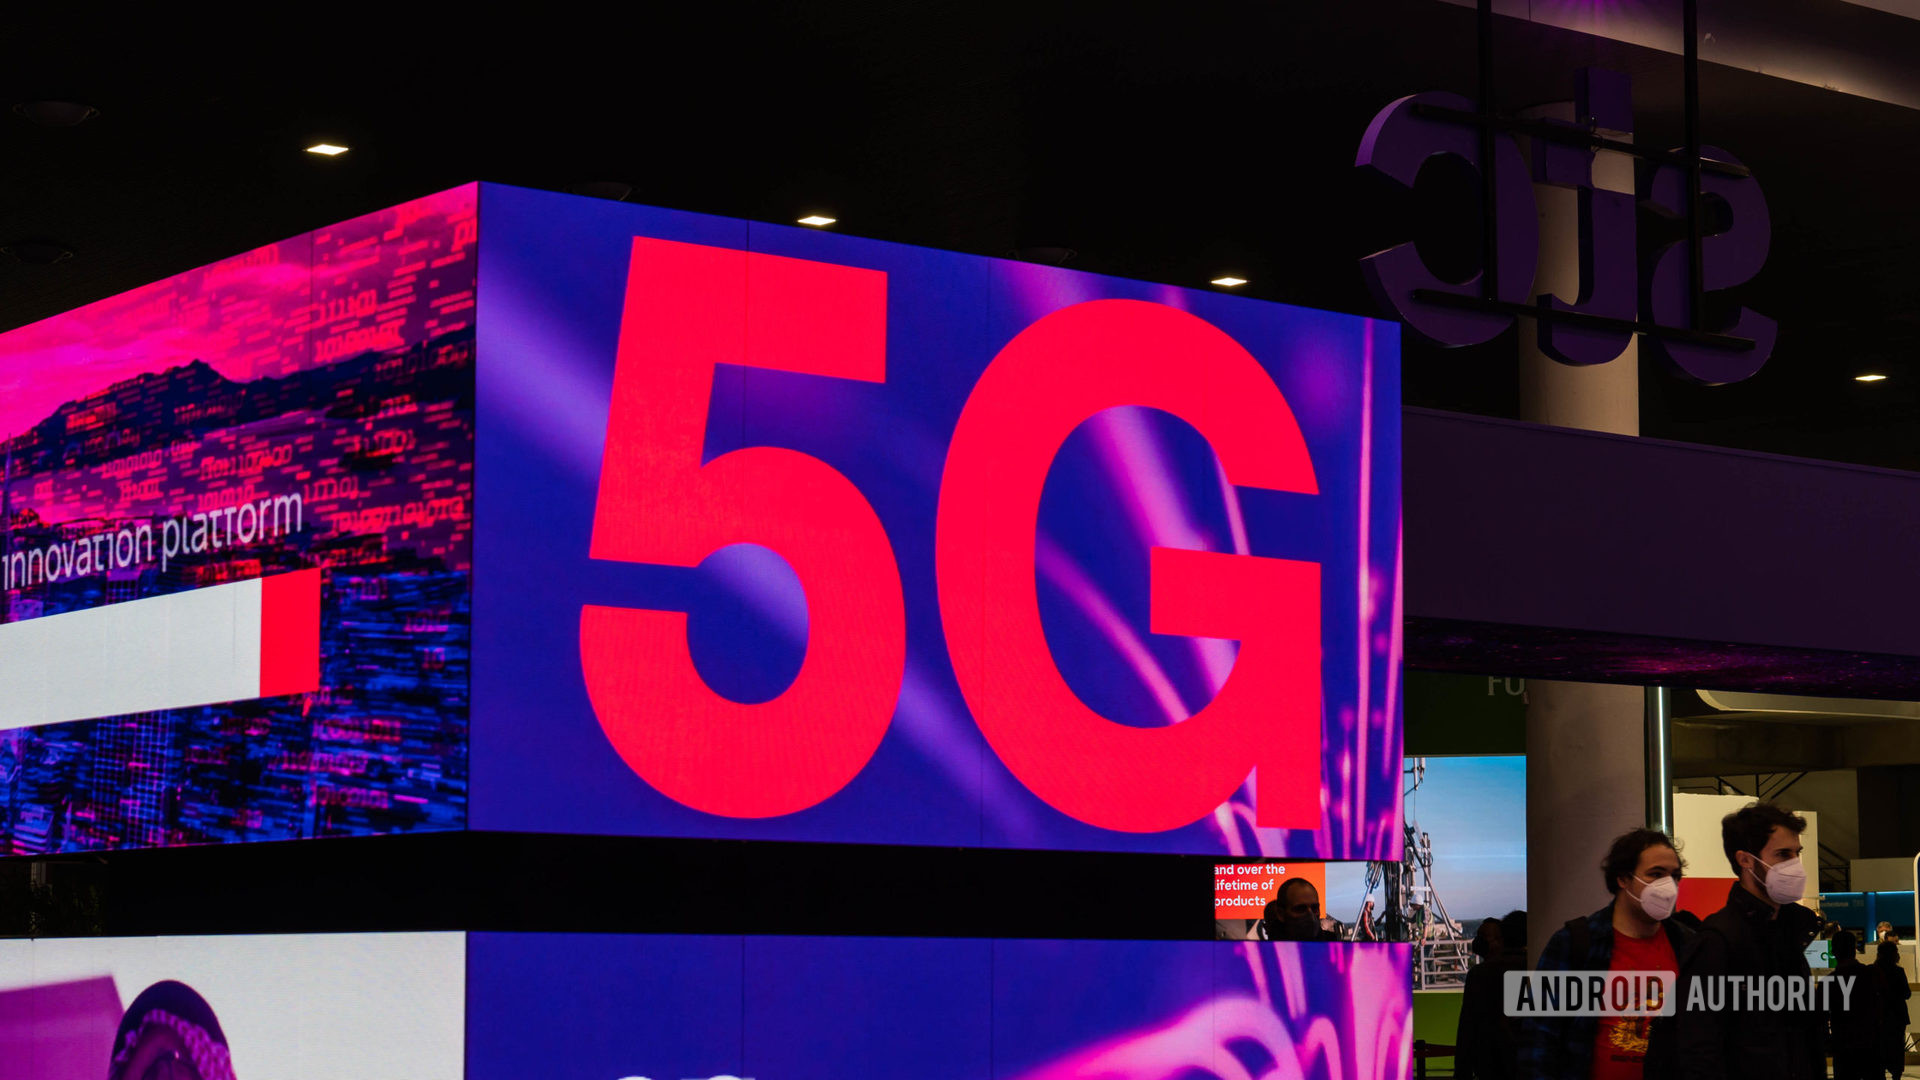 Red 5G logo projected 2